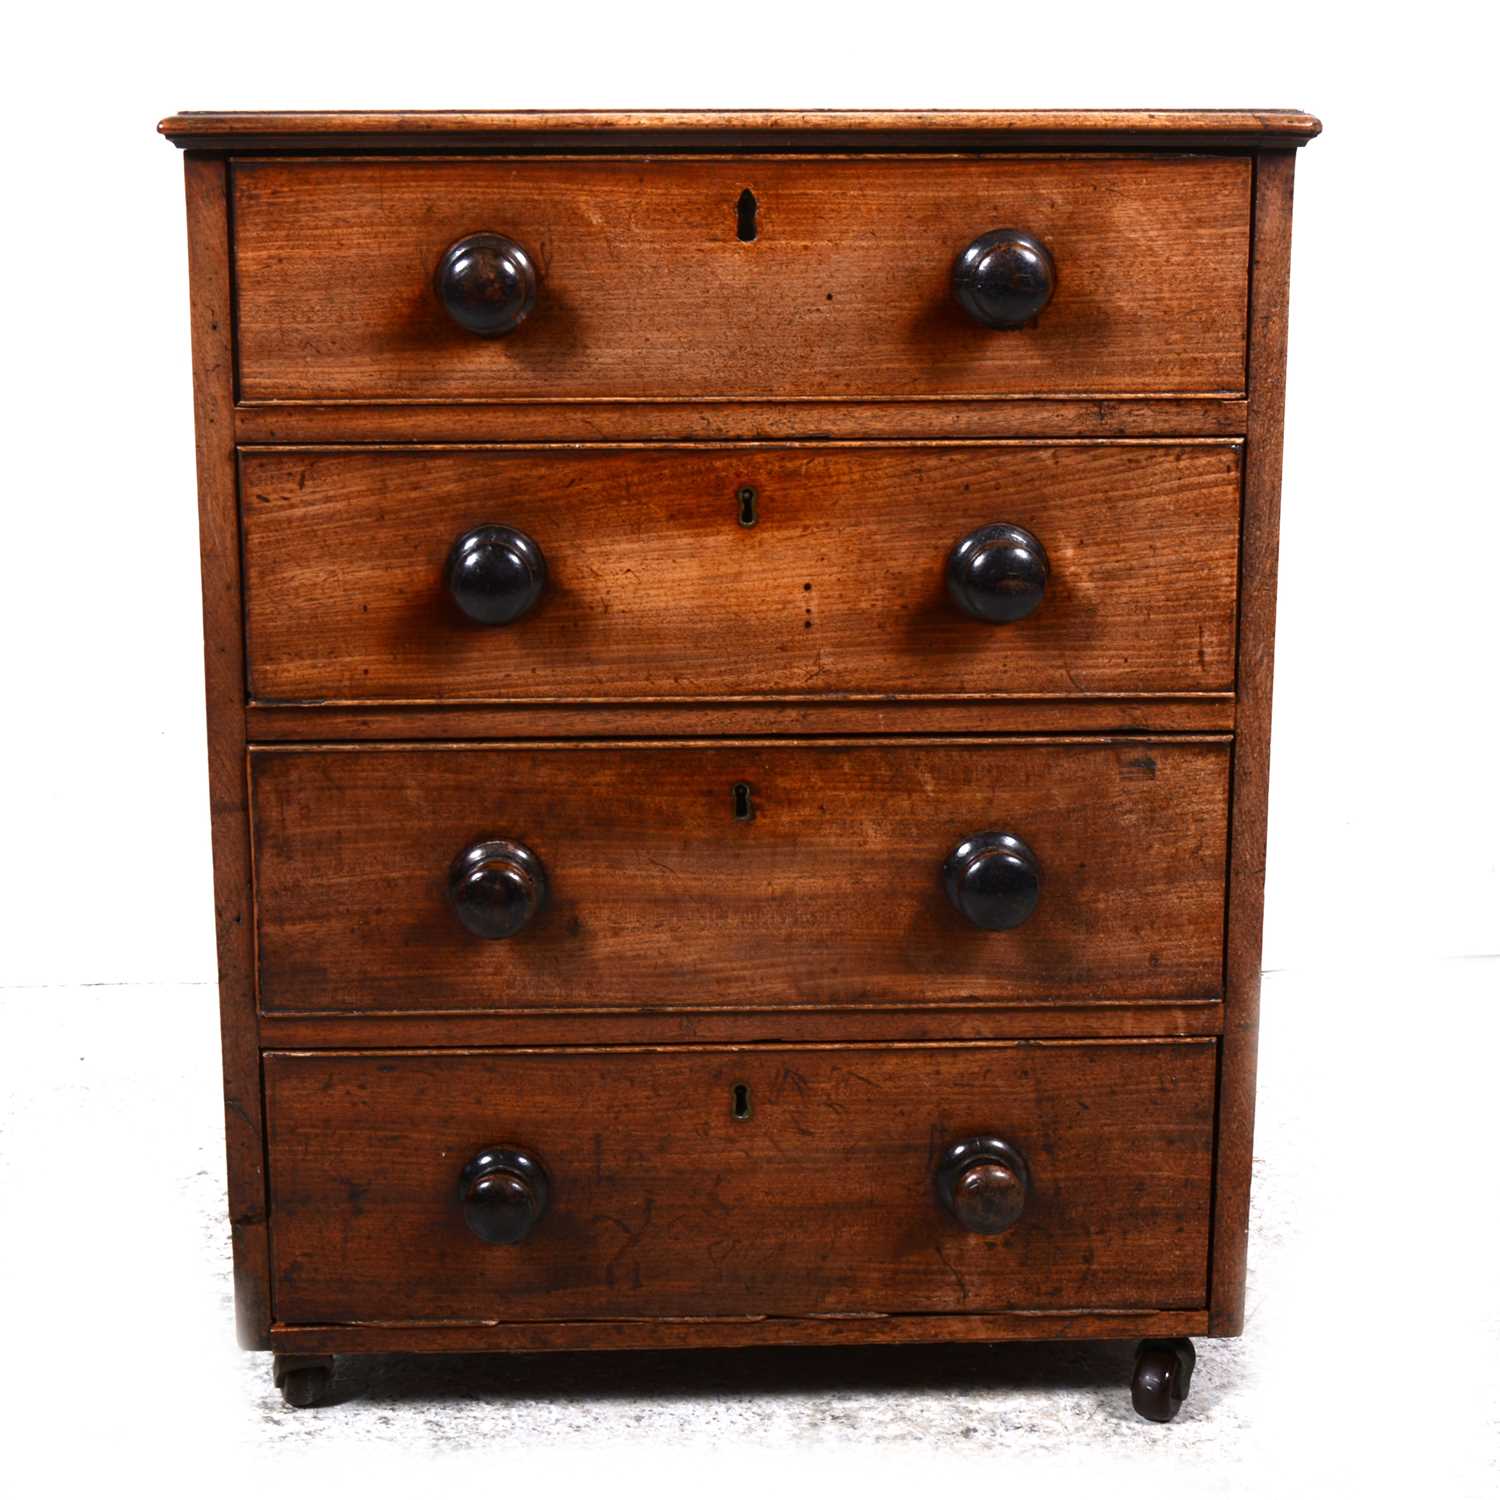 A Victorian mahogany chest of drawers, of small proportion